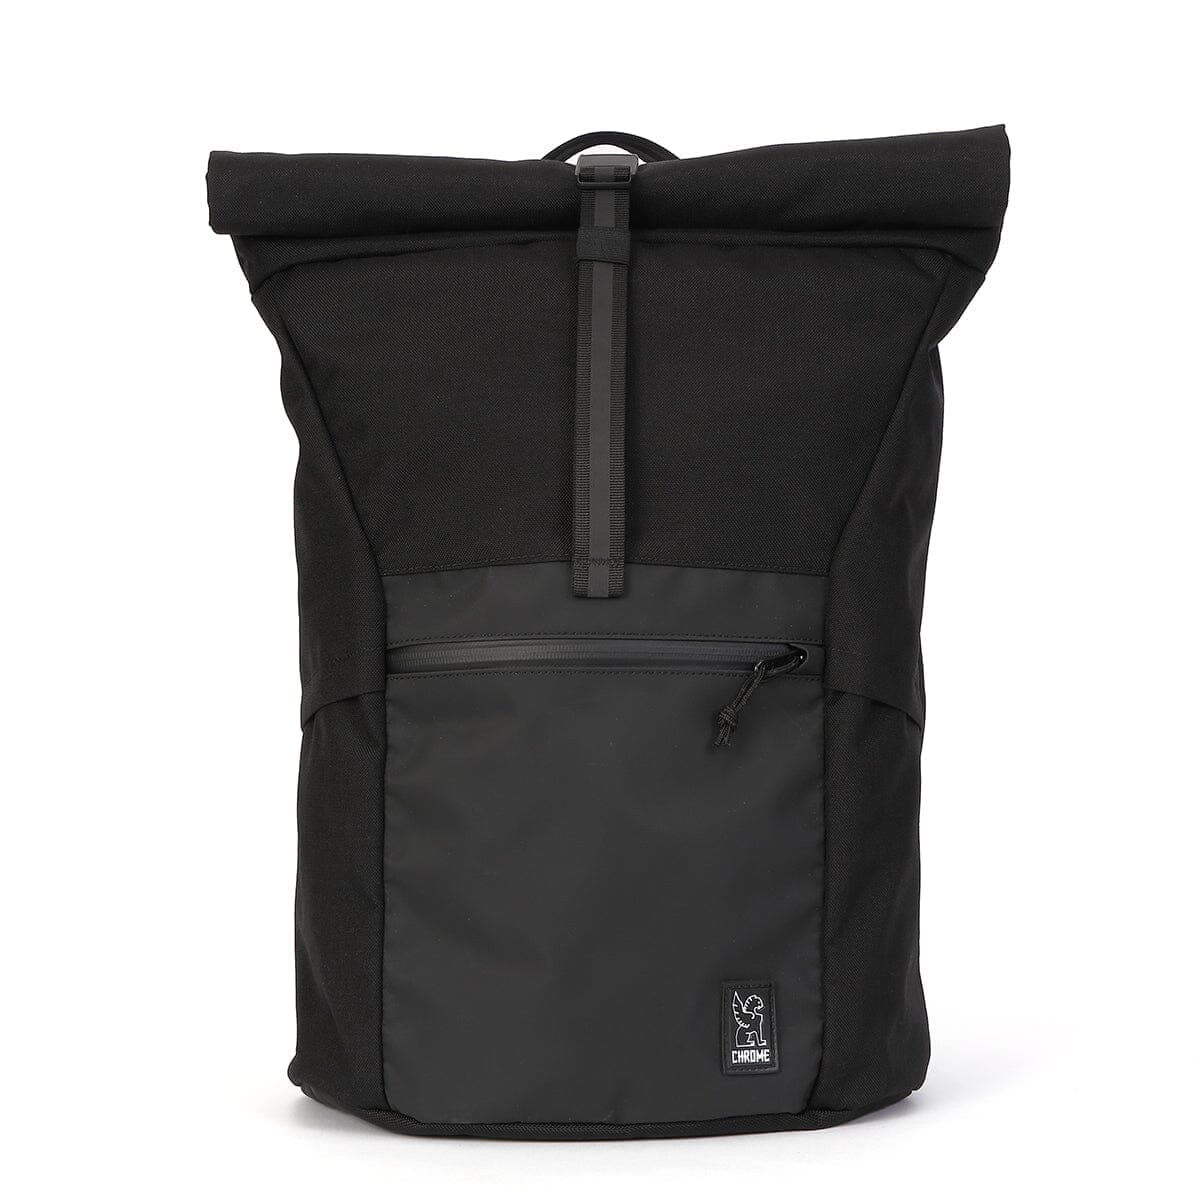 Yalta 4.0 backpack front view